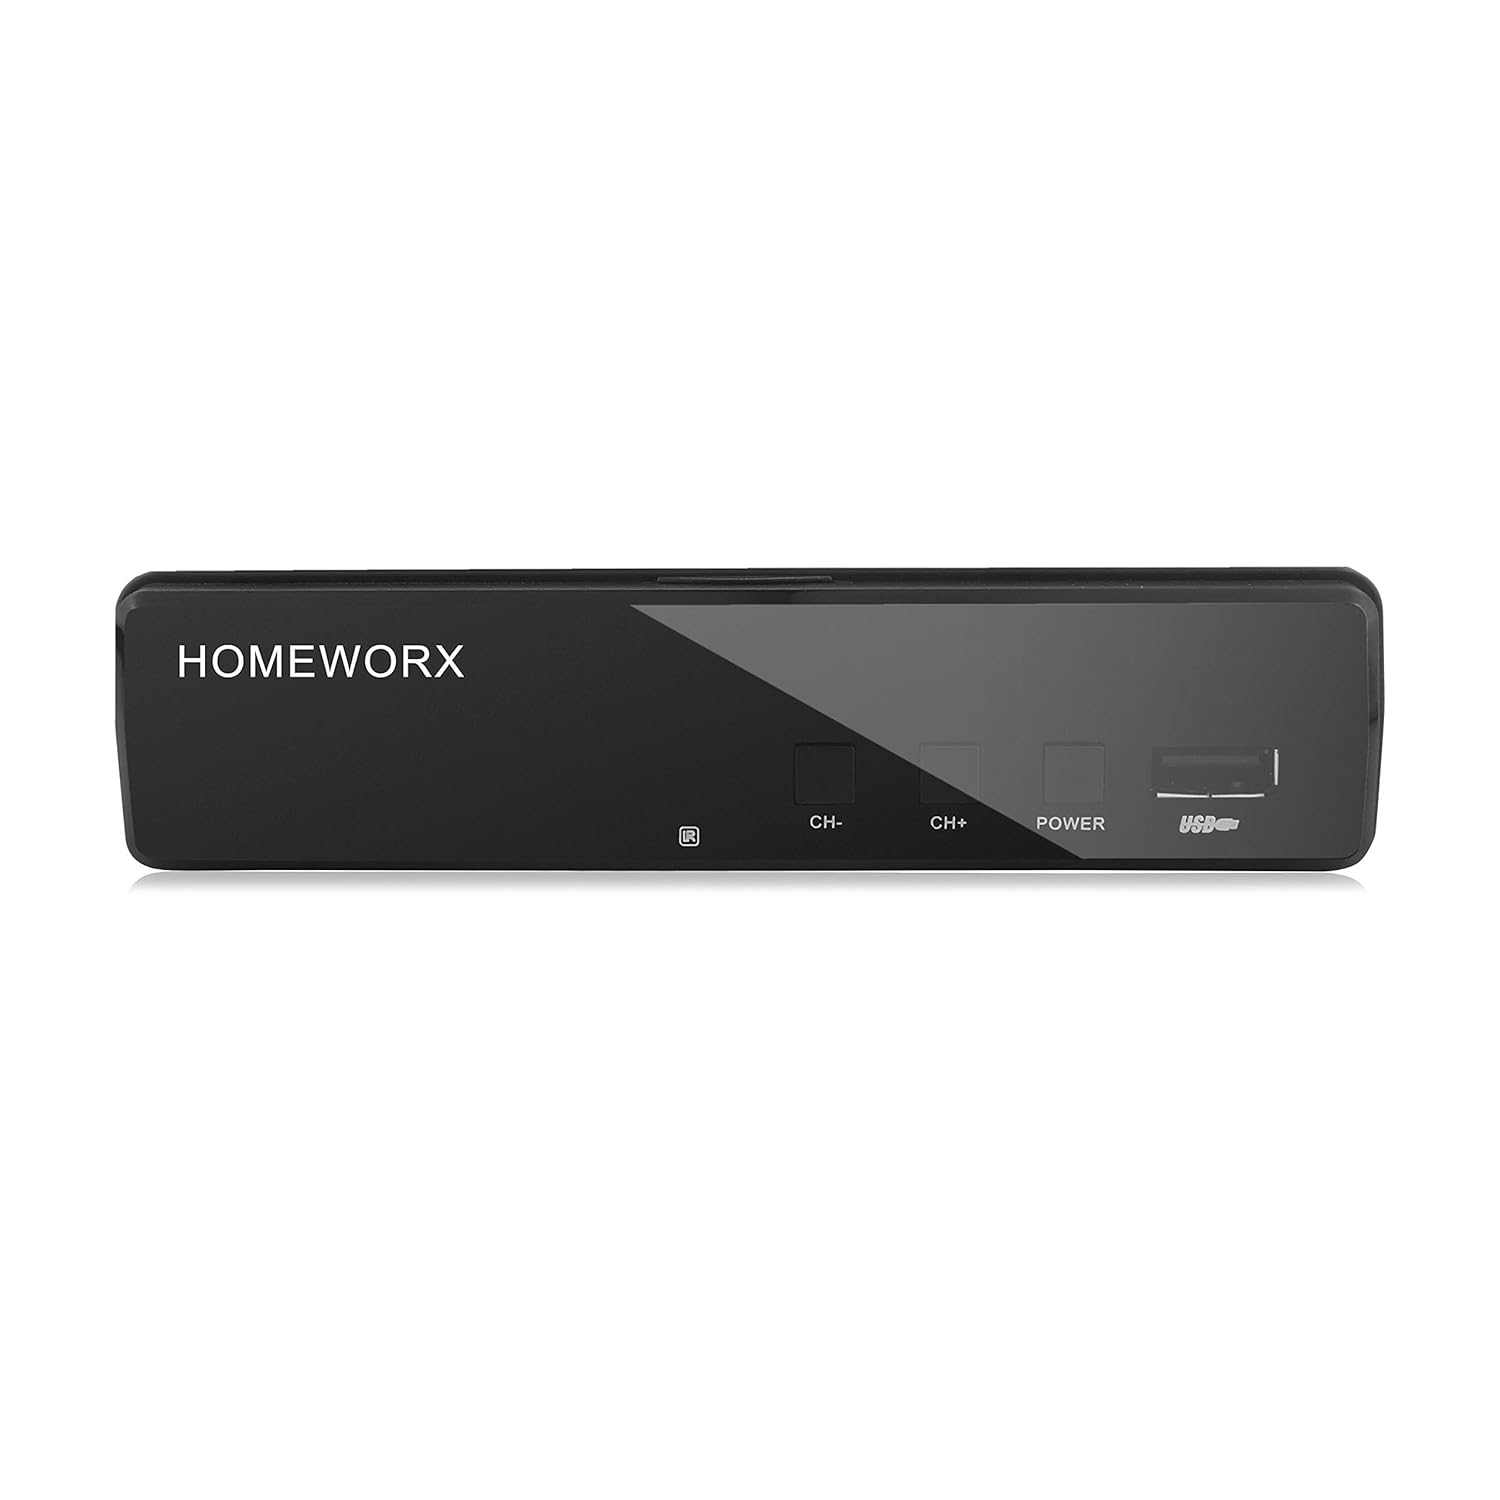 I recently stopped watching cable TV and switched all of my television sets to Antenna TV.  The Mediasonic Homeworx HW130STB Digital Converter Box made the transition very easy.  If you follow the instructions exactly as written, you will have no problem installing the converter box.  The picture and audio are very good quality, and I am able to watch several of the same channels that I had with cable.